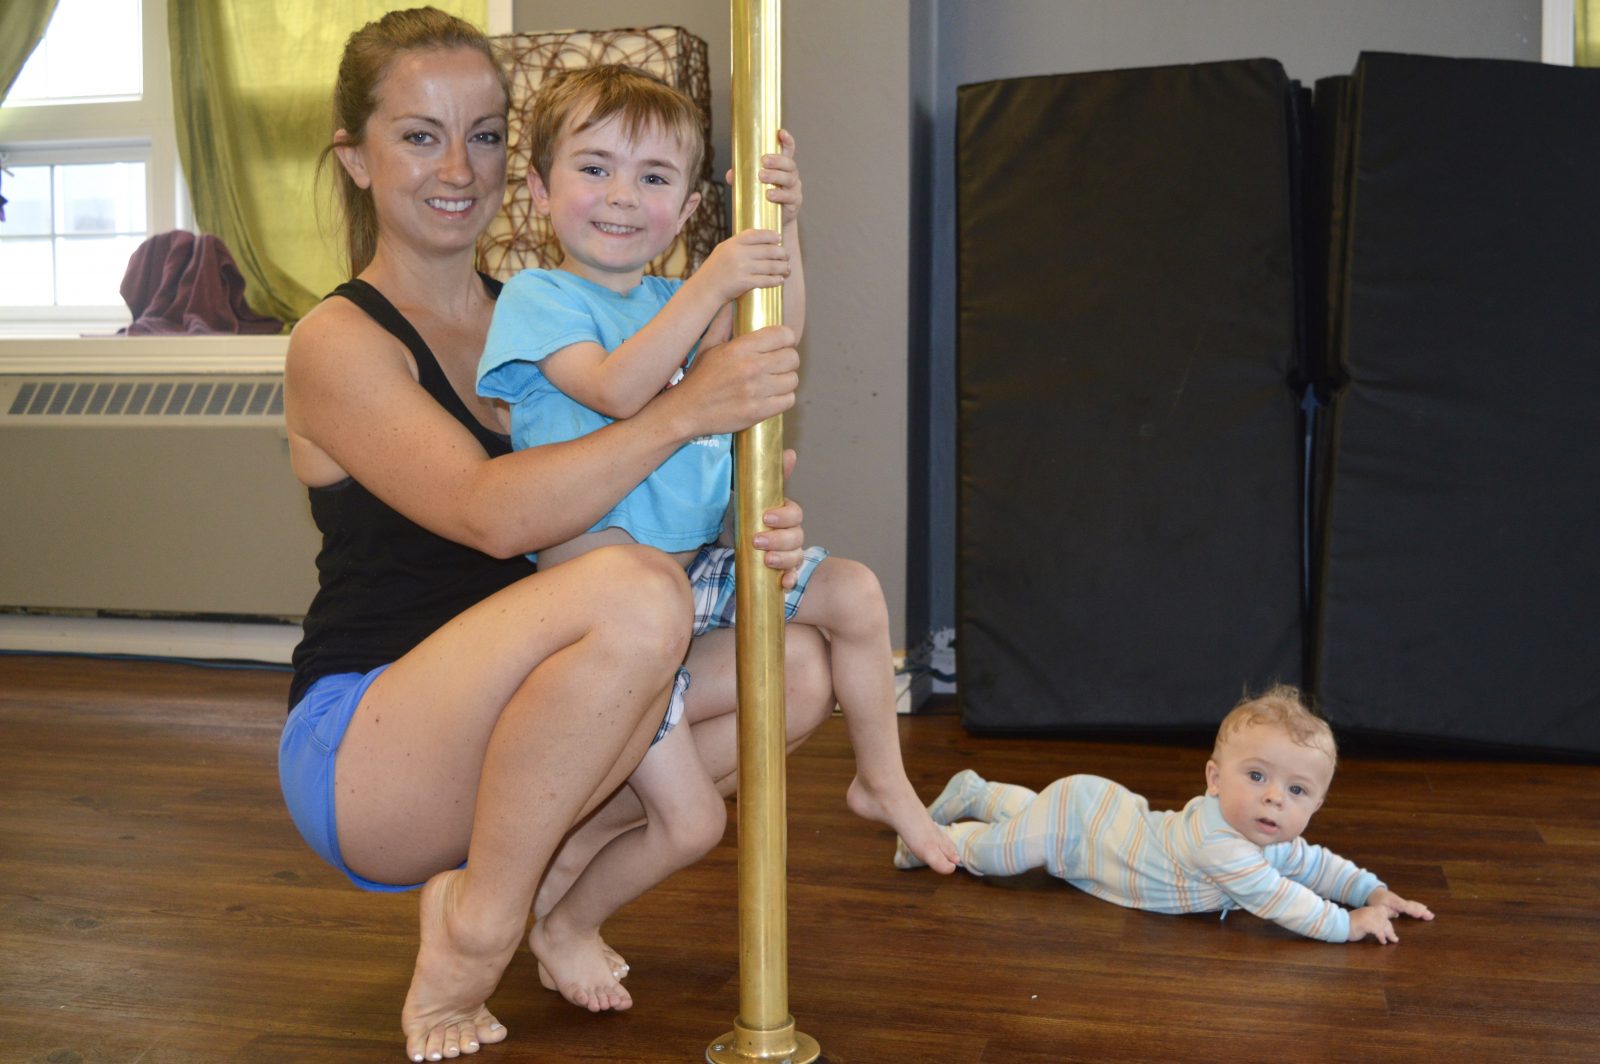 Local pole fitness instructor becoming Master Trainer